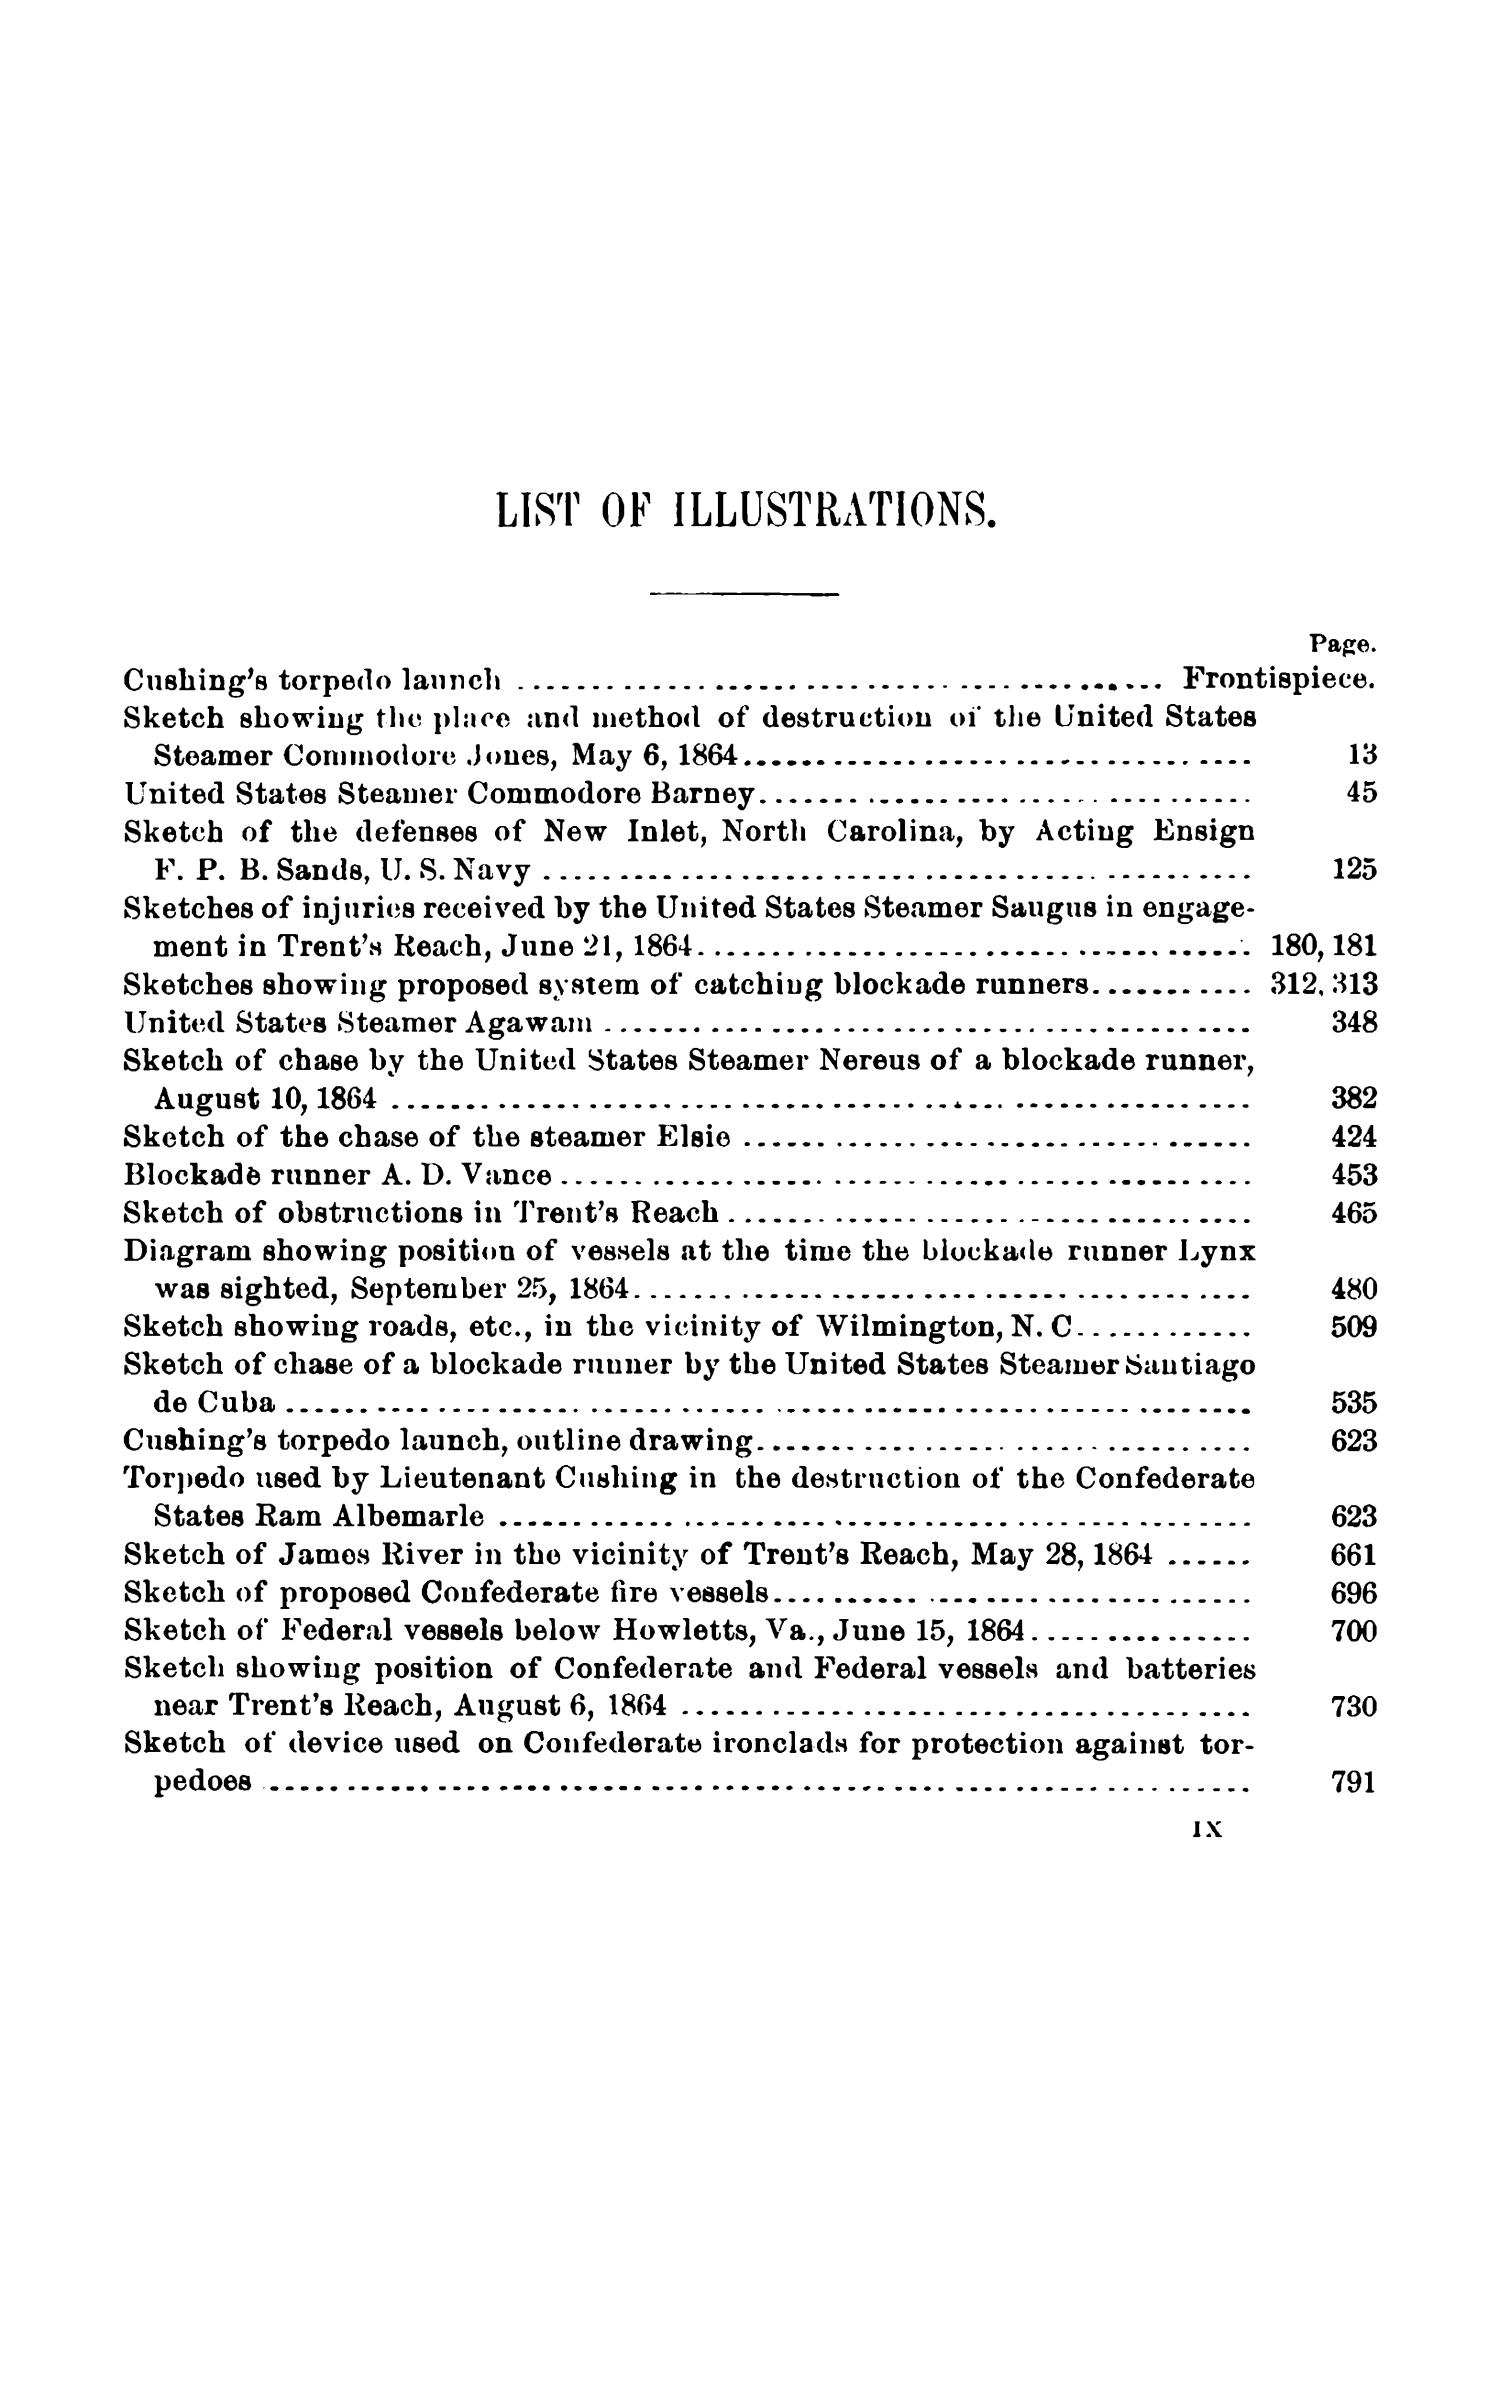 Official Records of the Union and Confederate Navies in the War of the Rebellion. Series 1, Volume 10.
                                                
                                                    IX
                                                